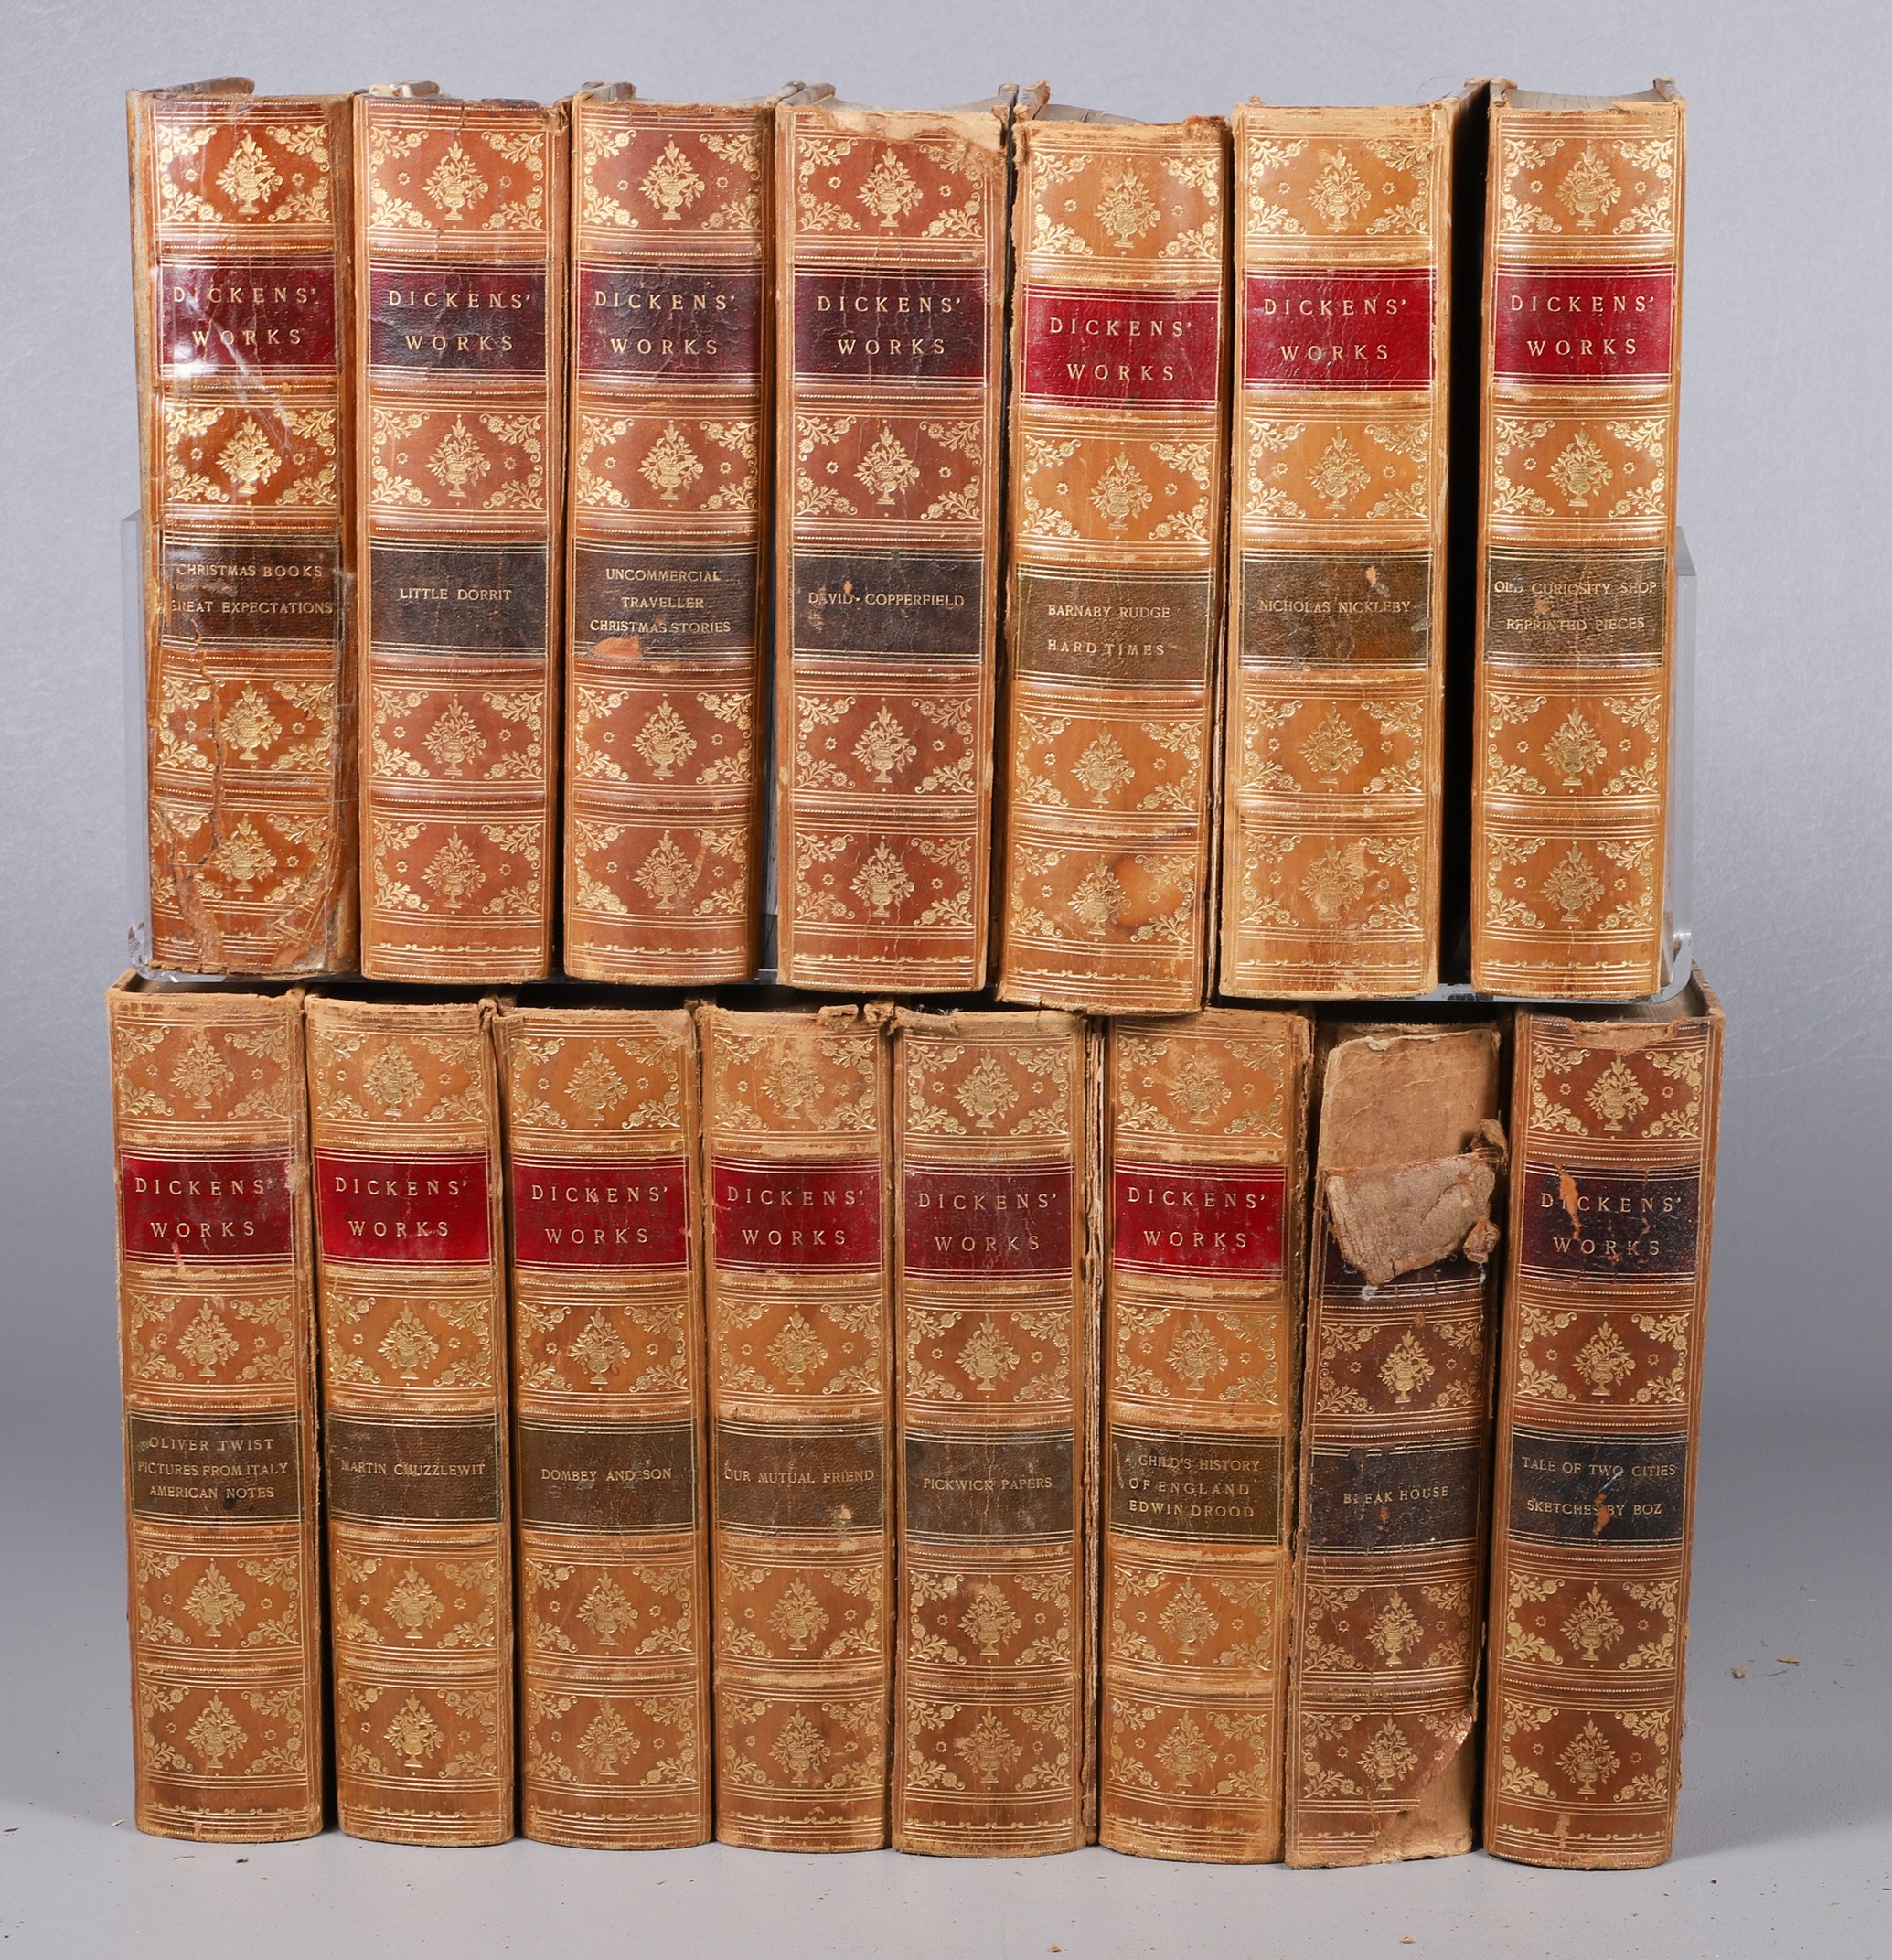 A fifteen-volume set of the works of